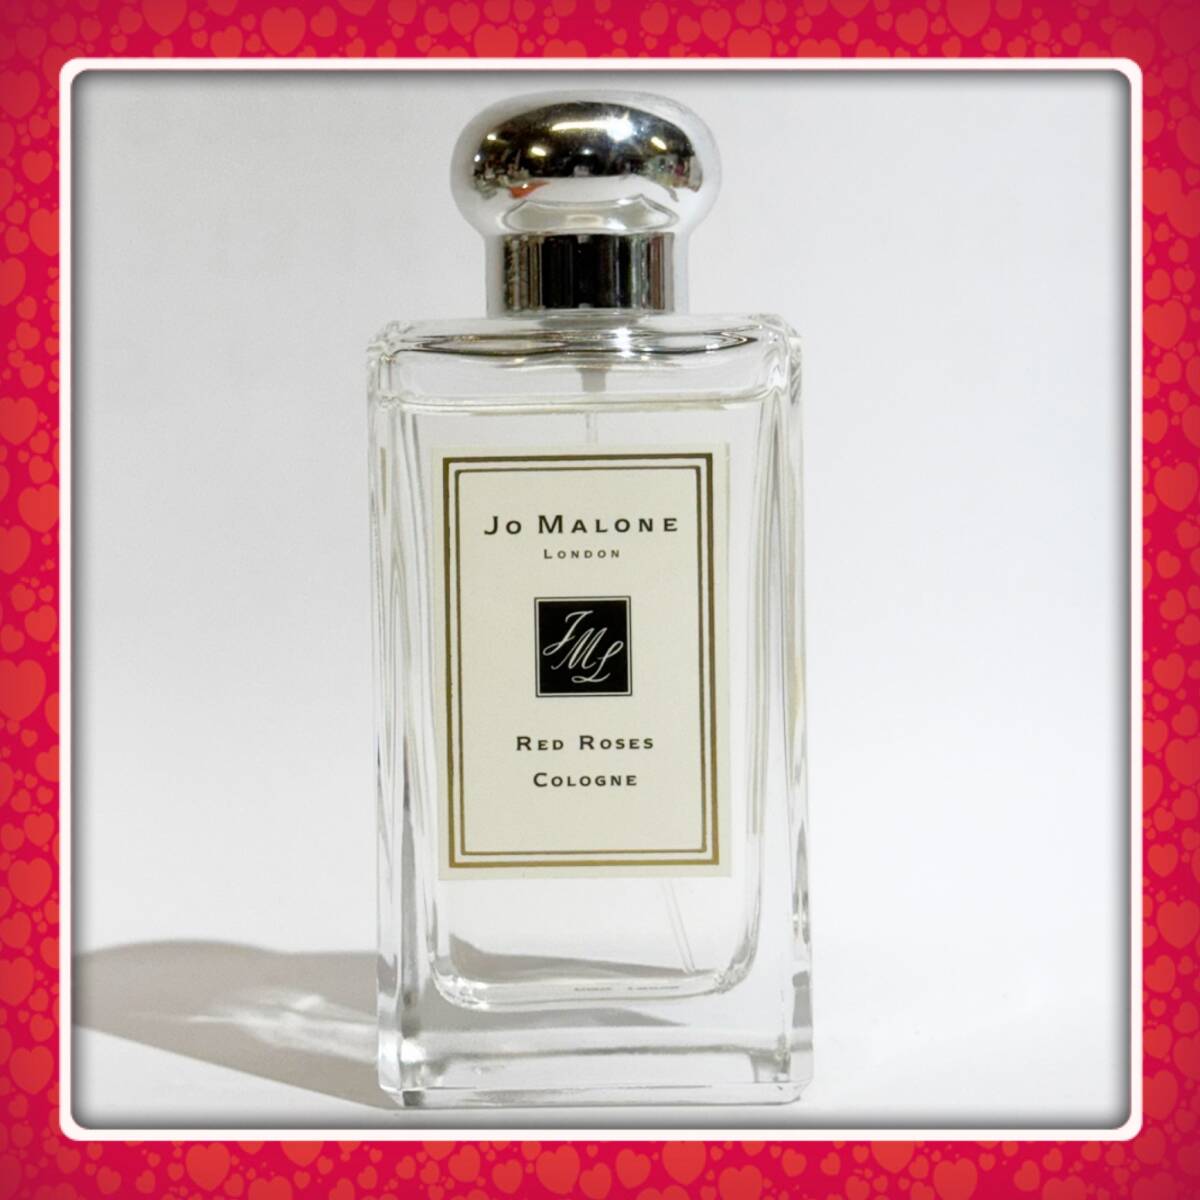 Jo MALONE LONDON ジョーマローン ★レッドローズ コロン 100ml★RED ROSES COLOGNE ★残量多の画像1